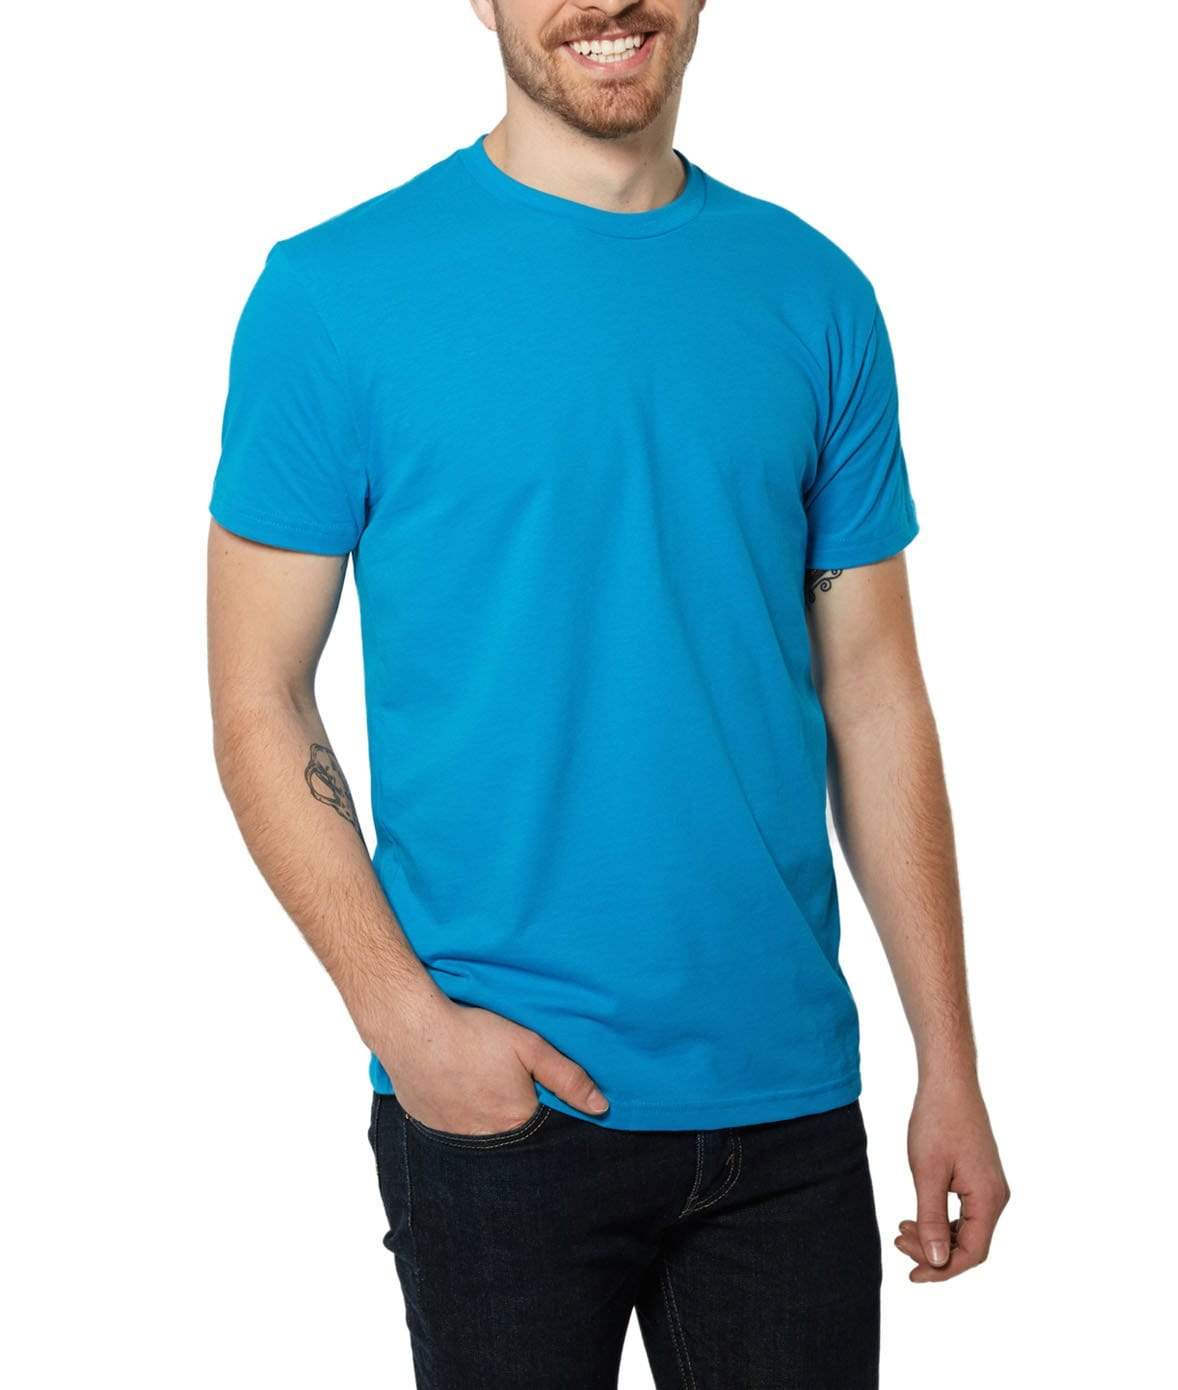 Nayked Apparel Men Men's Ridiculously Soft Sueded Crew T-Shirt | Classic